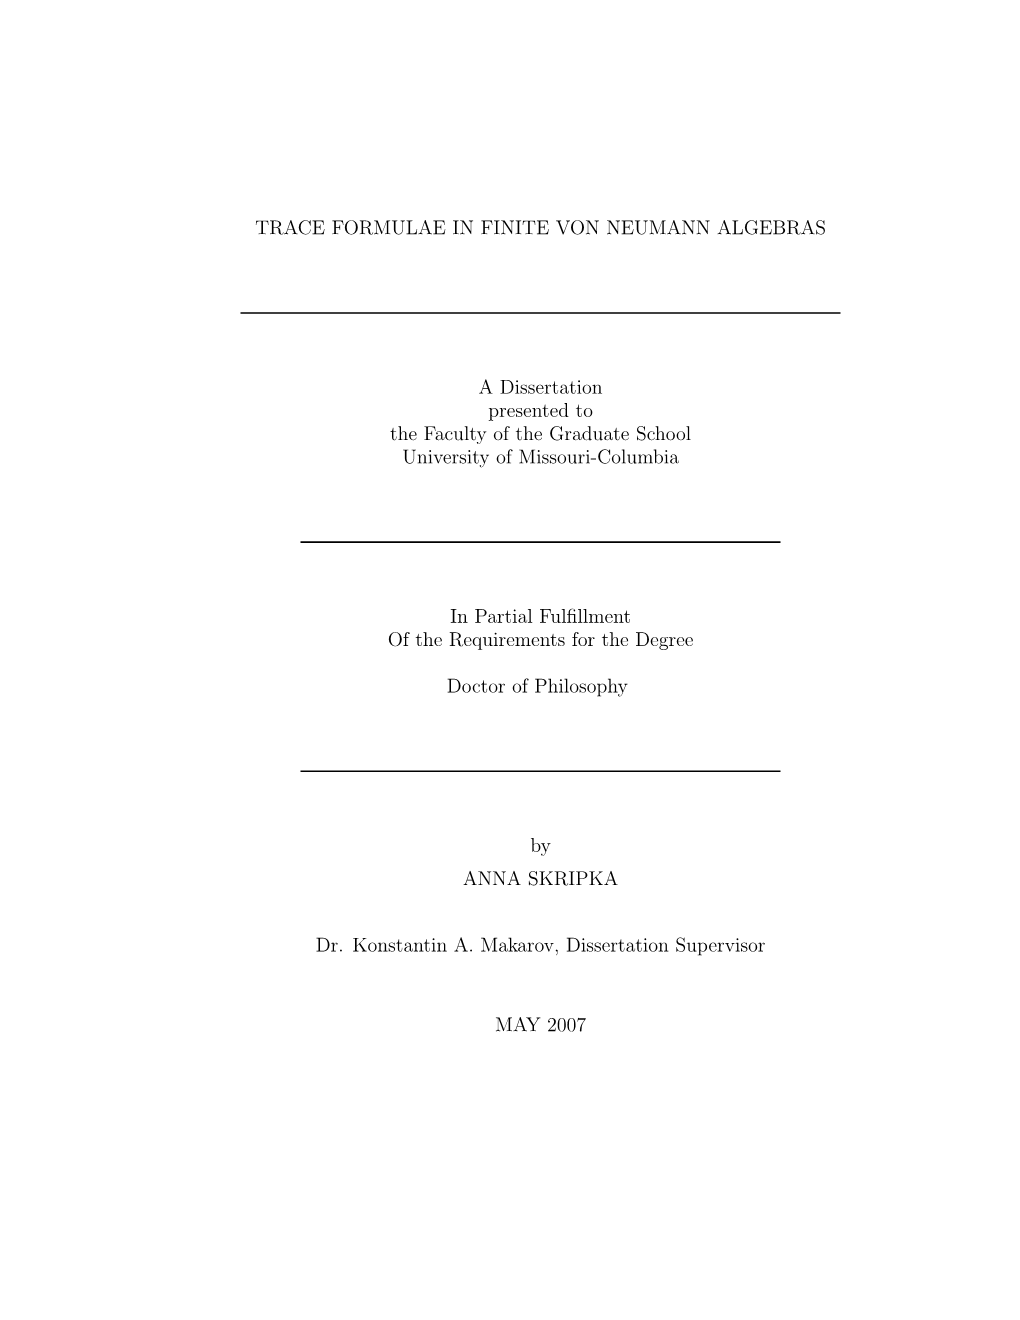 TRACE FORMULAE in FINITE VON NEUMANN ALGEBRAS a Dissertation Presented to the Faculty of the Graduate School University of Misso